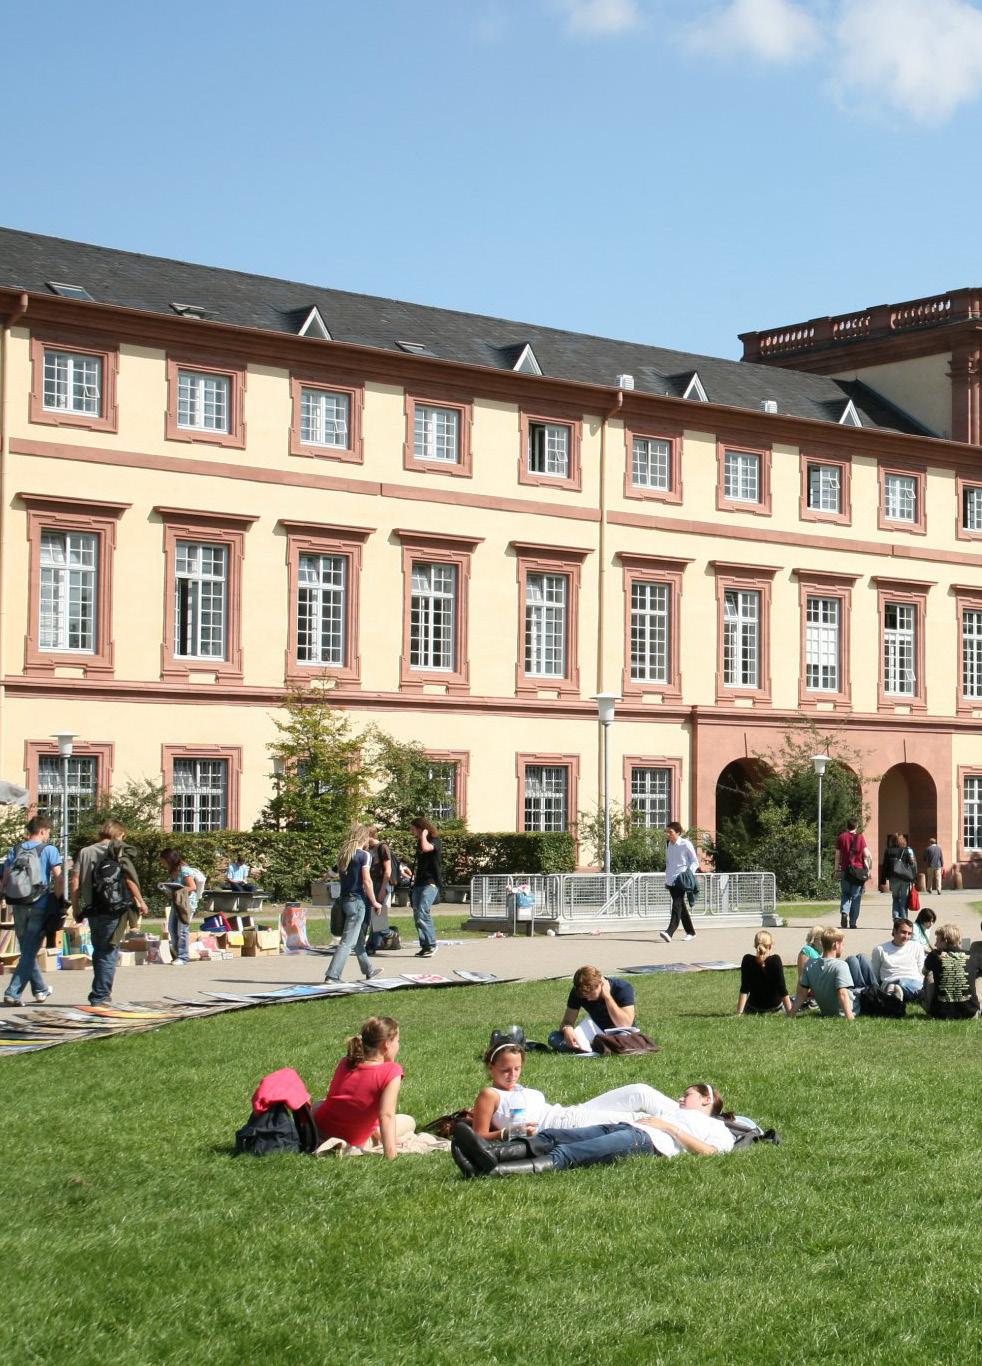 Why the University of Mannheim?